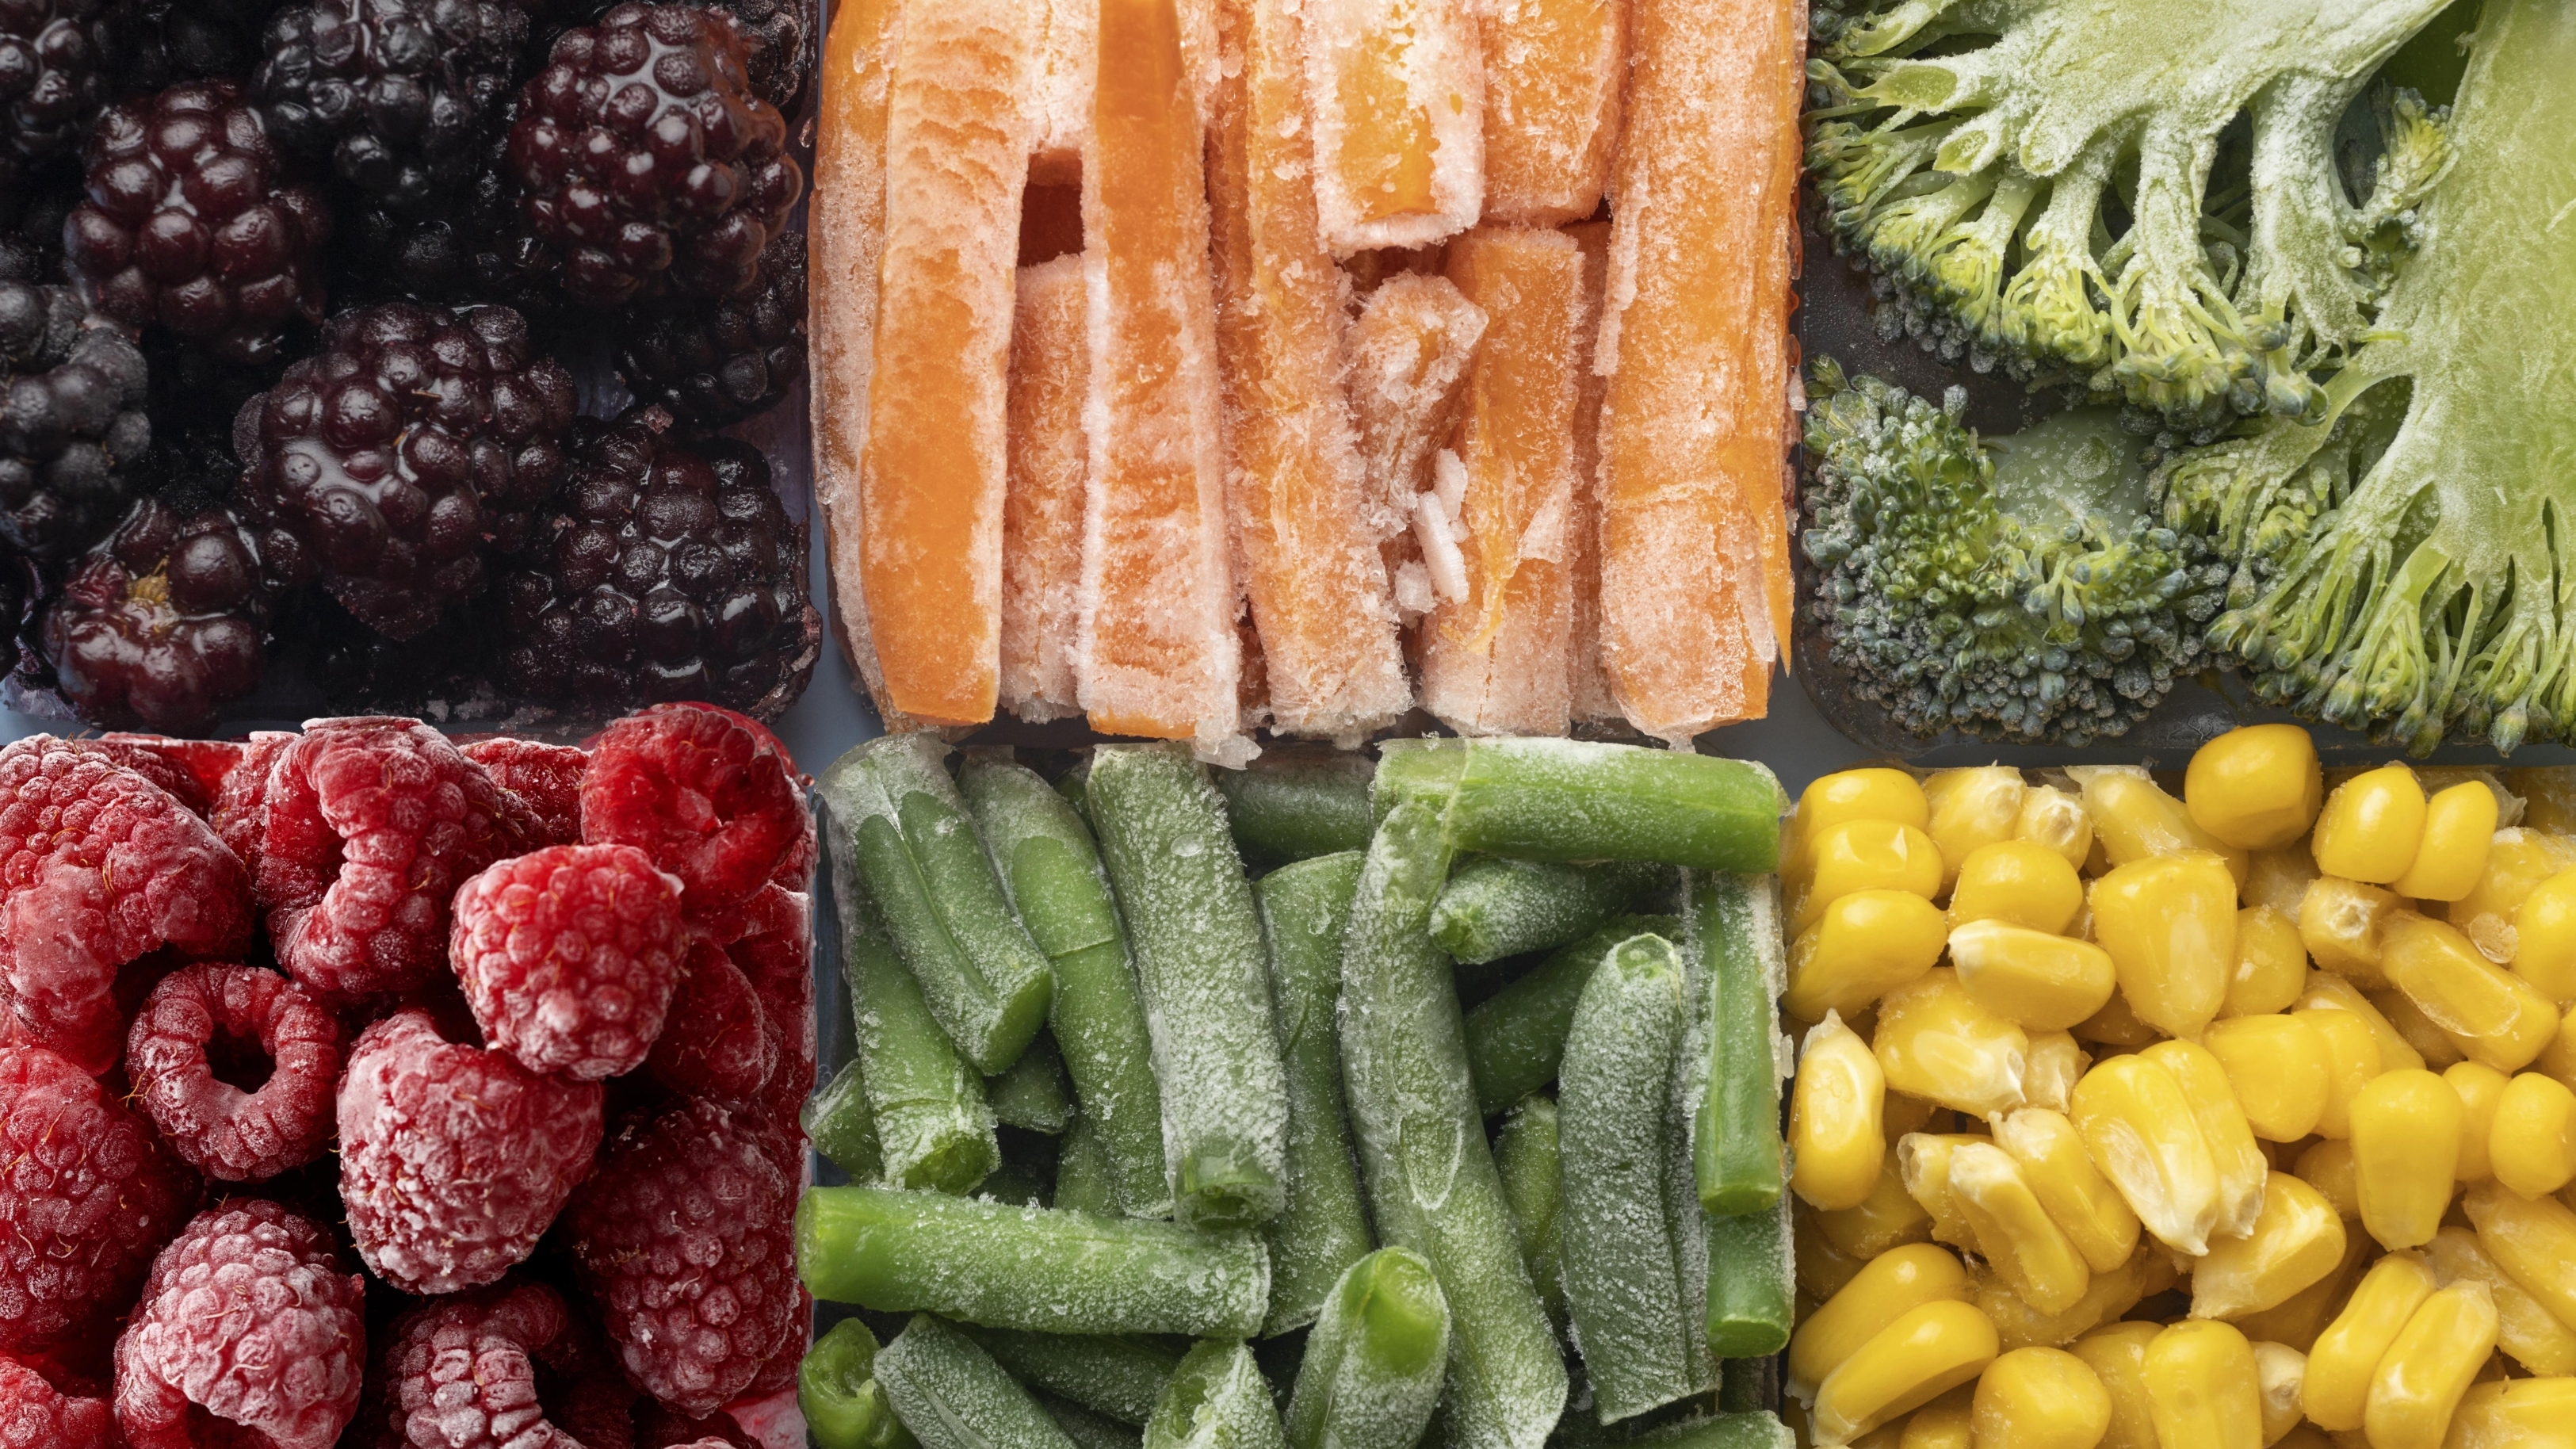 Why Freezing is the Future - aerial image of 6 different frozen fruit and veg